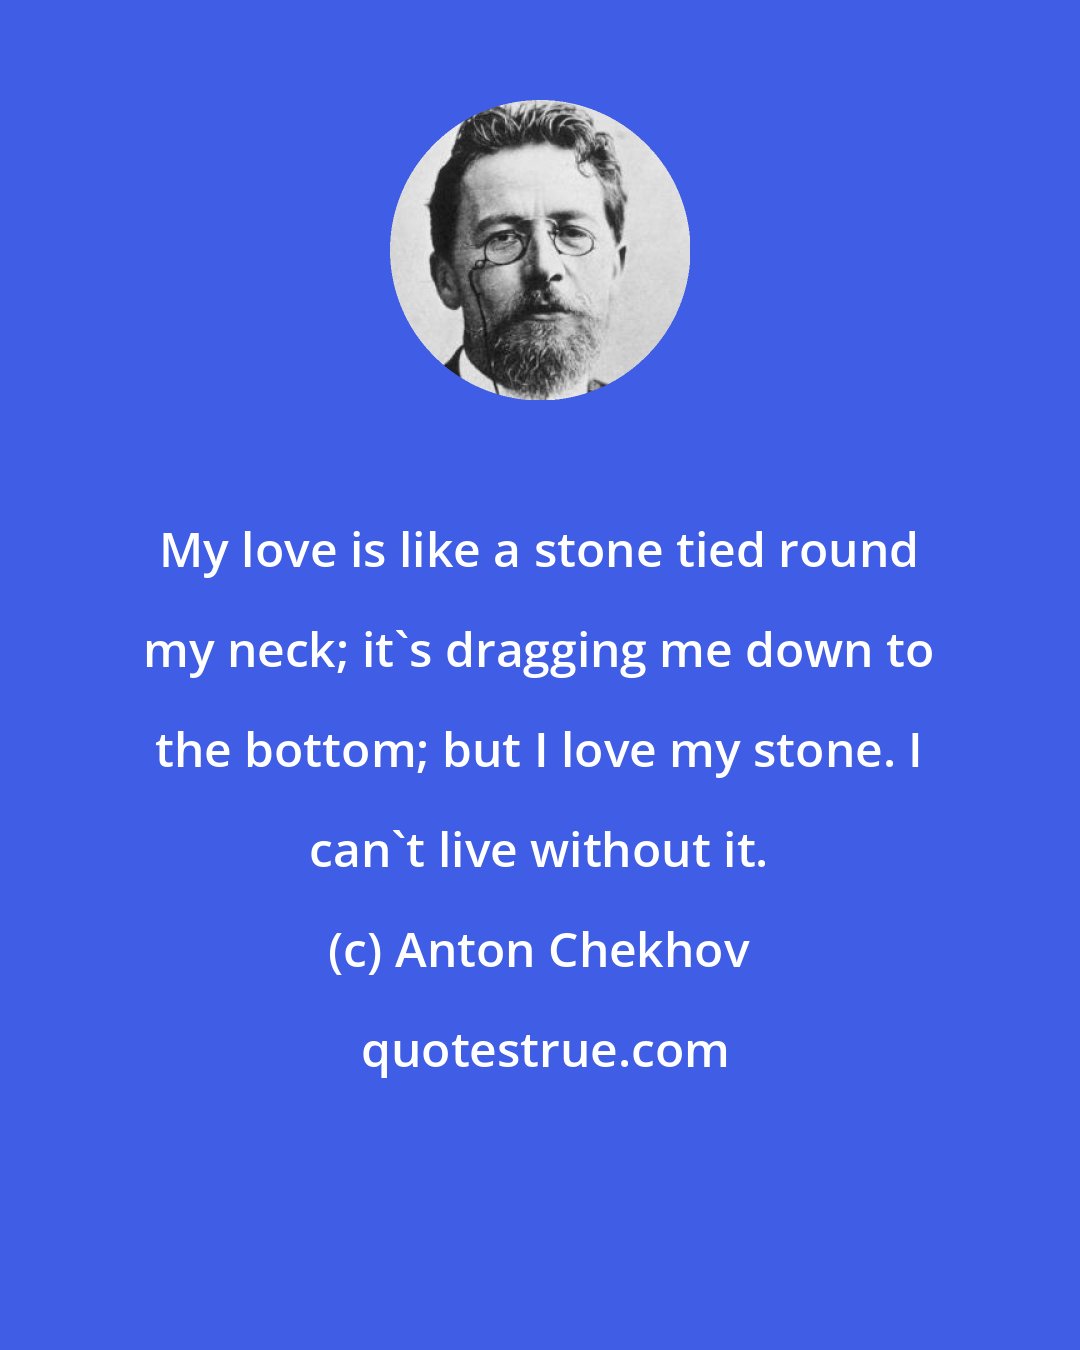 Anton Chekhov: My love is like a stone tied round my neck; it's dragging me down to the bottom; but I love my stone. I can't live without it.